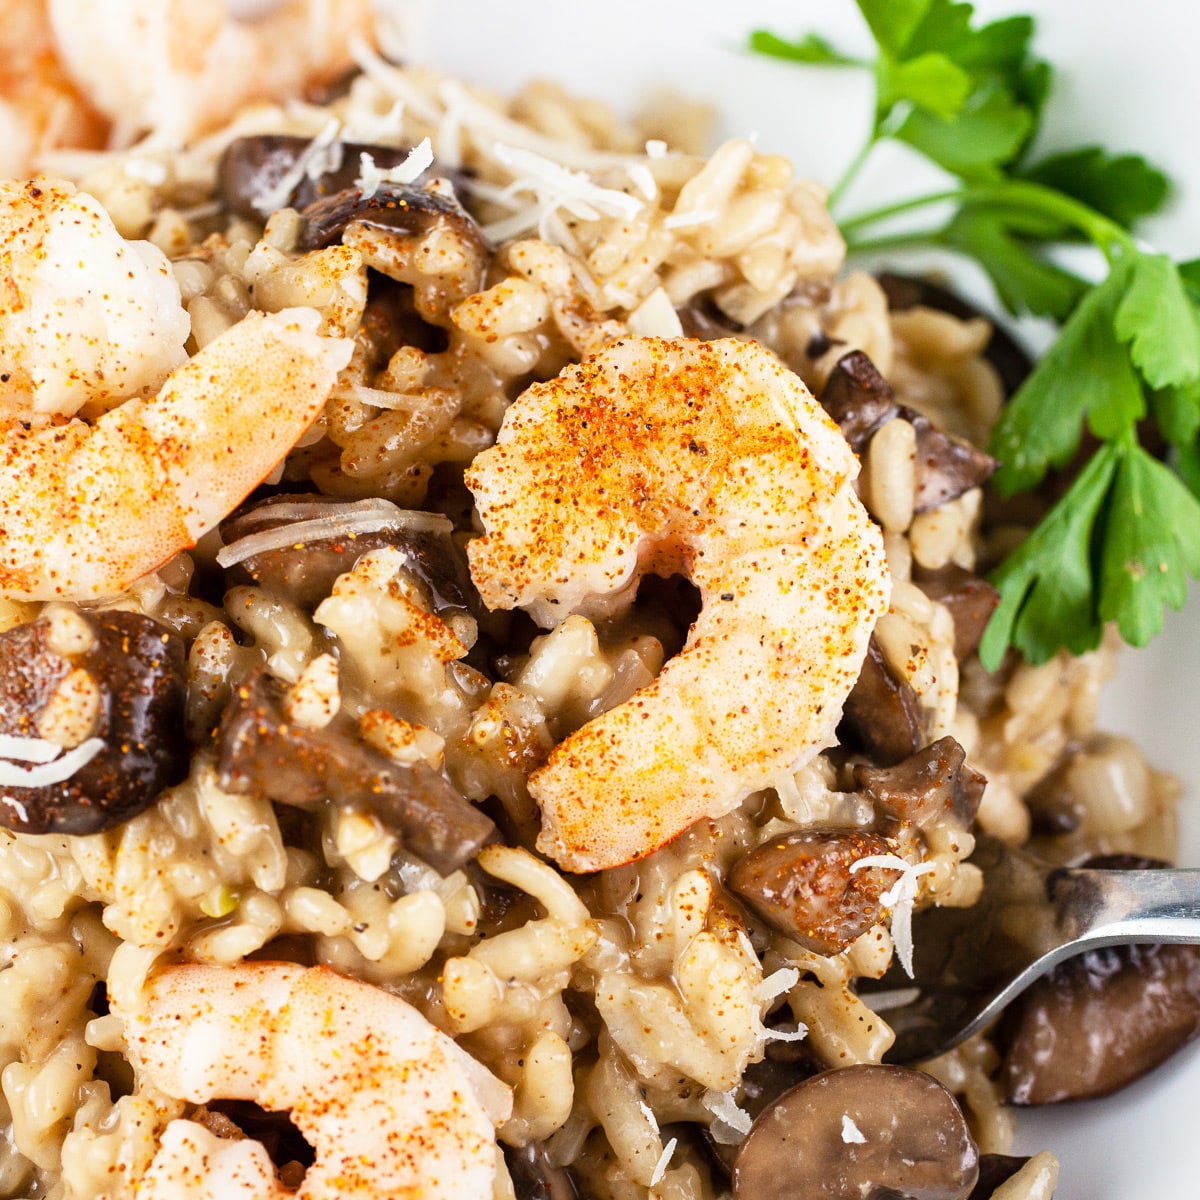 https://www.therusticfoodie.com/wp-content/uploads/2023/05/Garlicky-Mushroom-and-Shrimp-Risotto-redo-featured-1.jpg